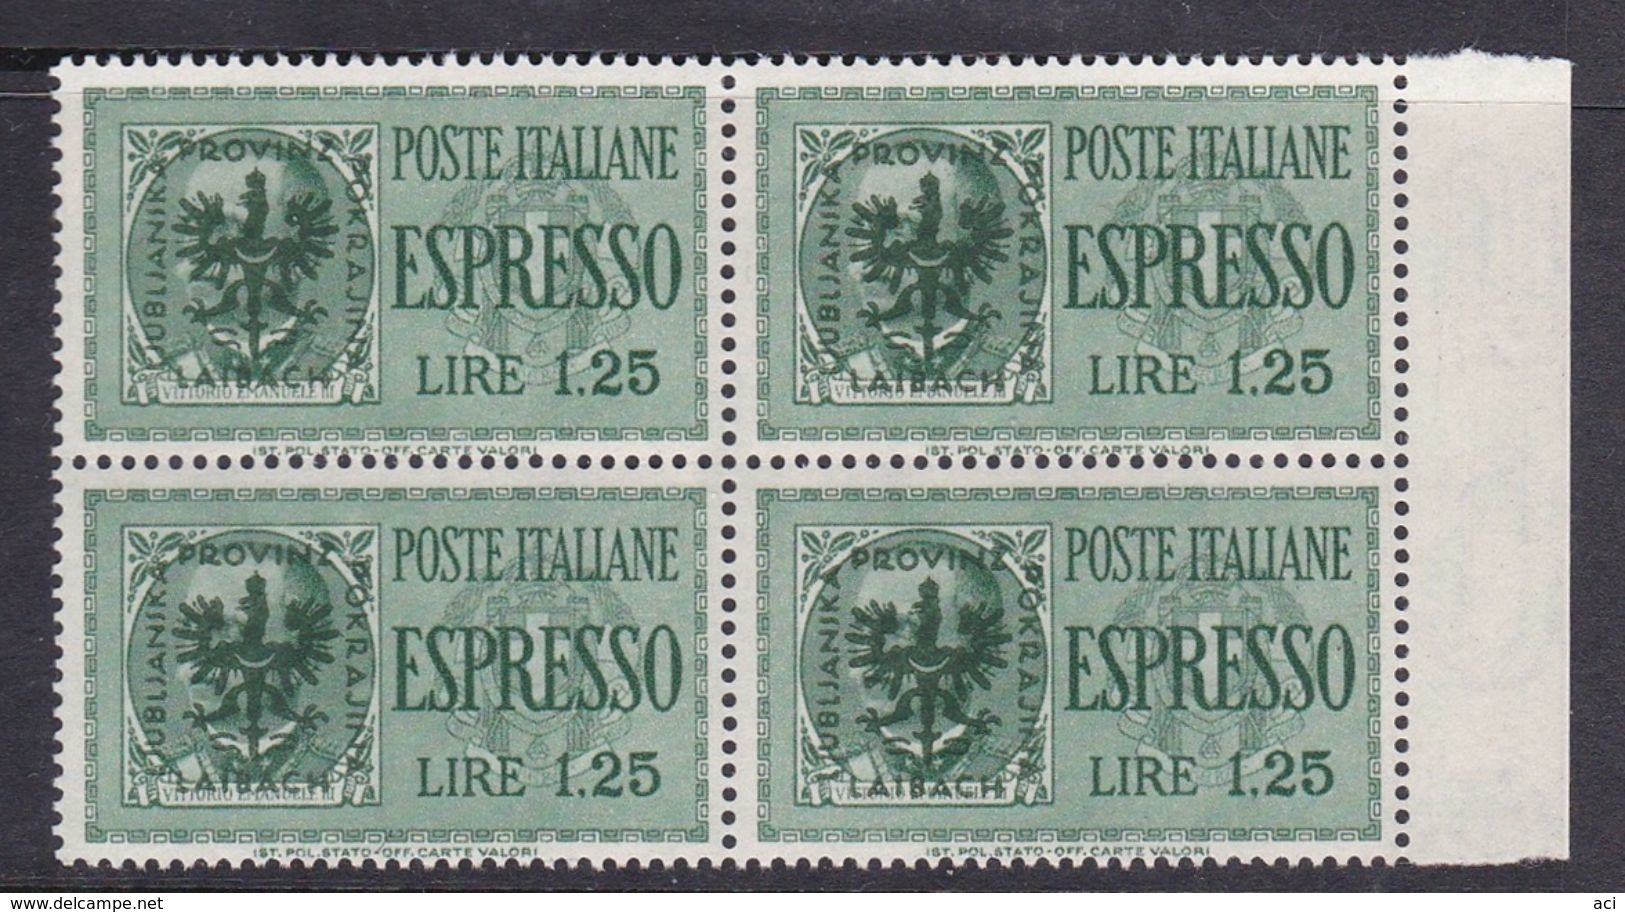 Italy-WW II Occupation-German Occupation Of Lubiana, E 4 1944 Special Delivery Stamp, Lire 1,25 Green Block 4 MNH - Occ. Allemande: Lubiana